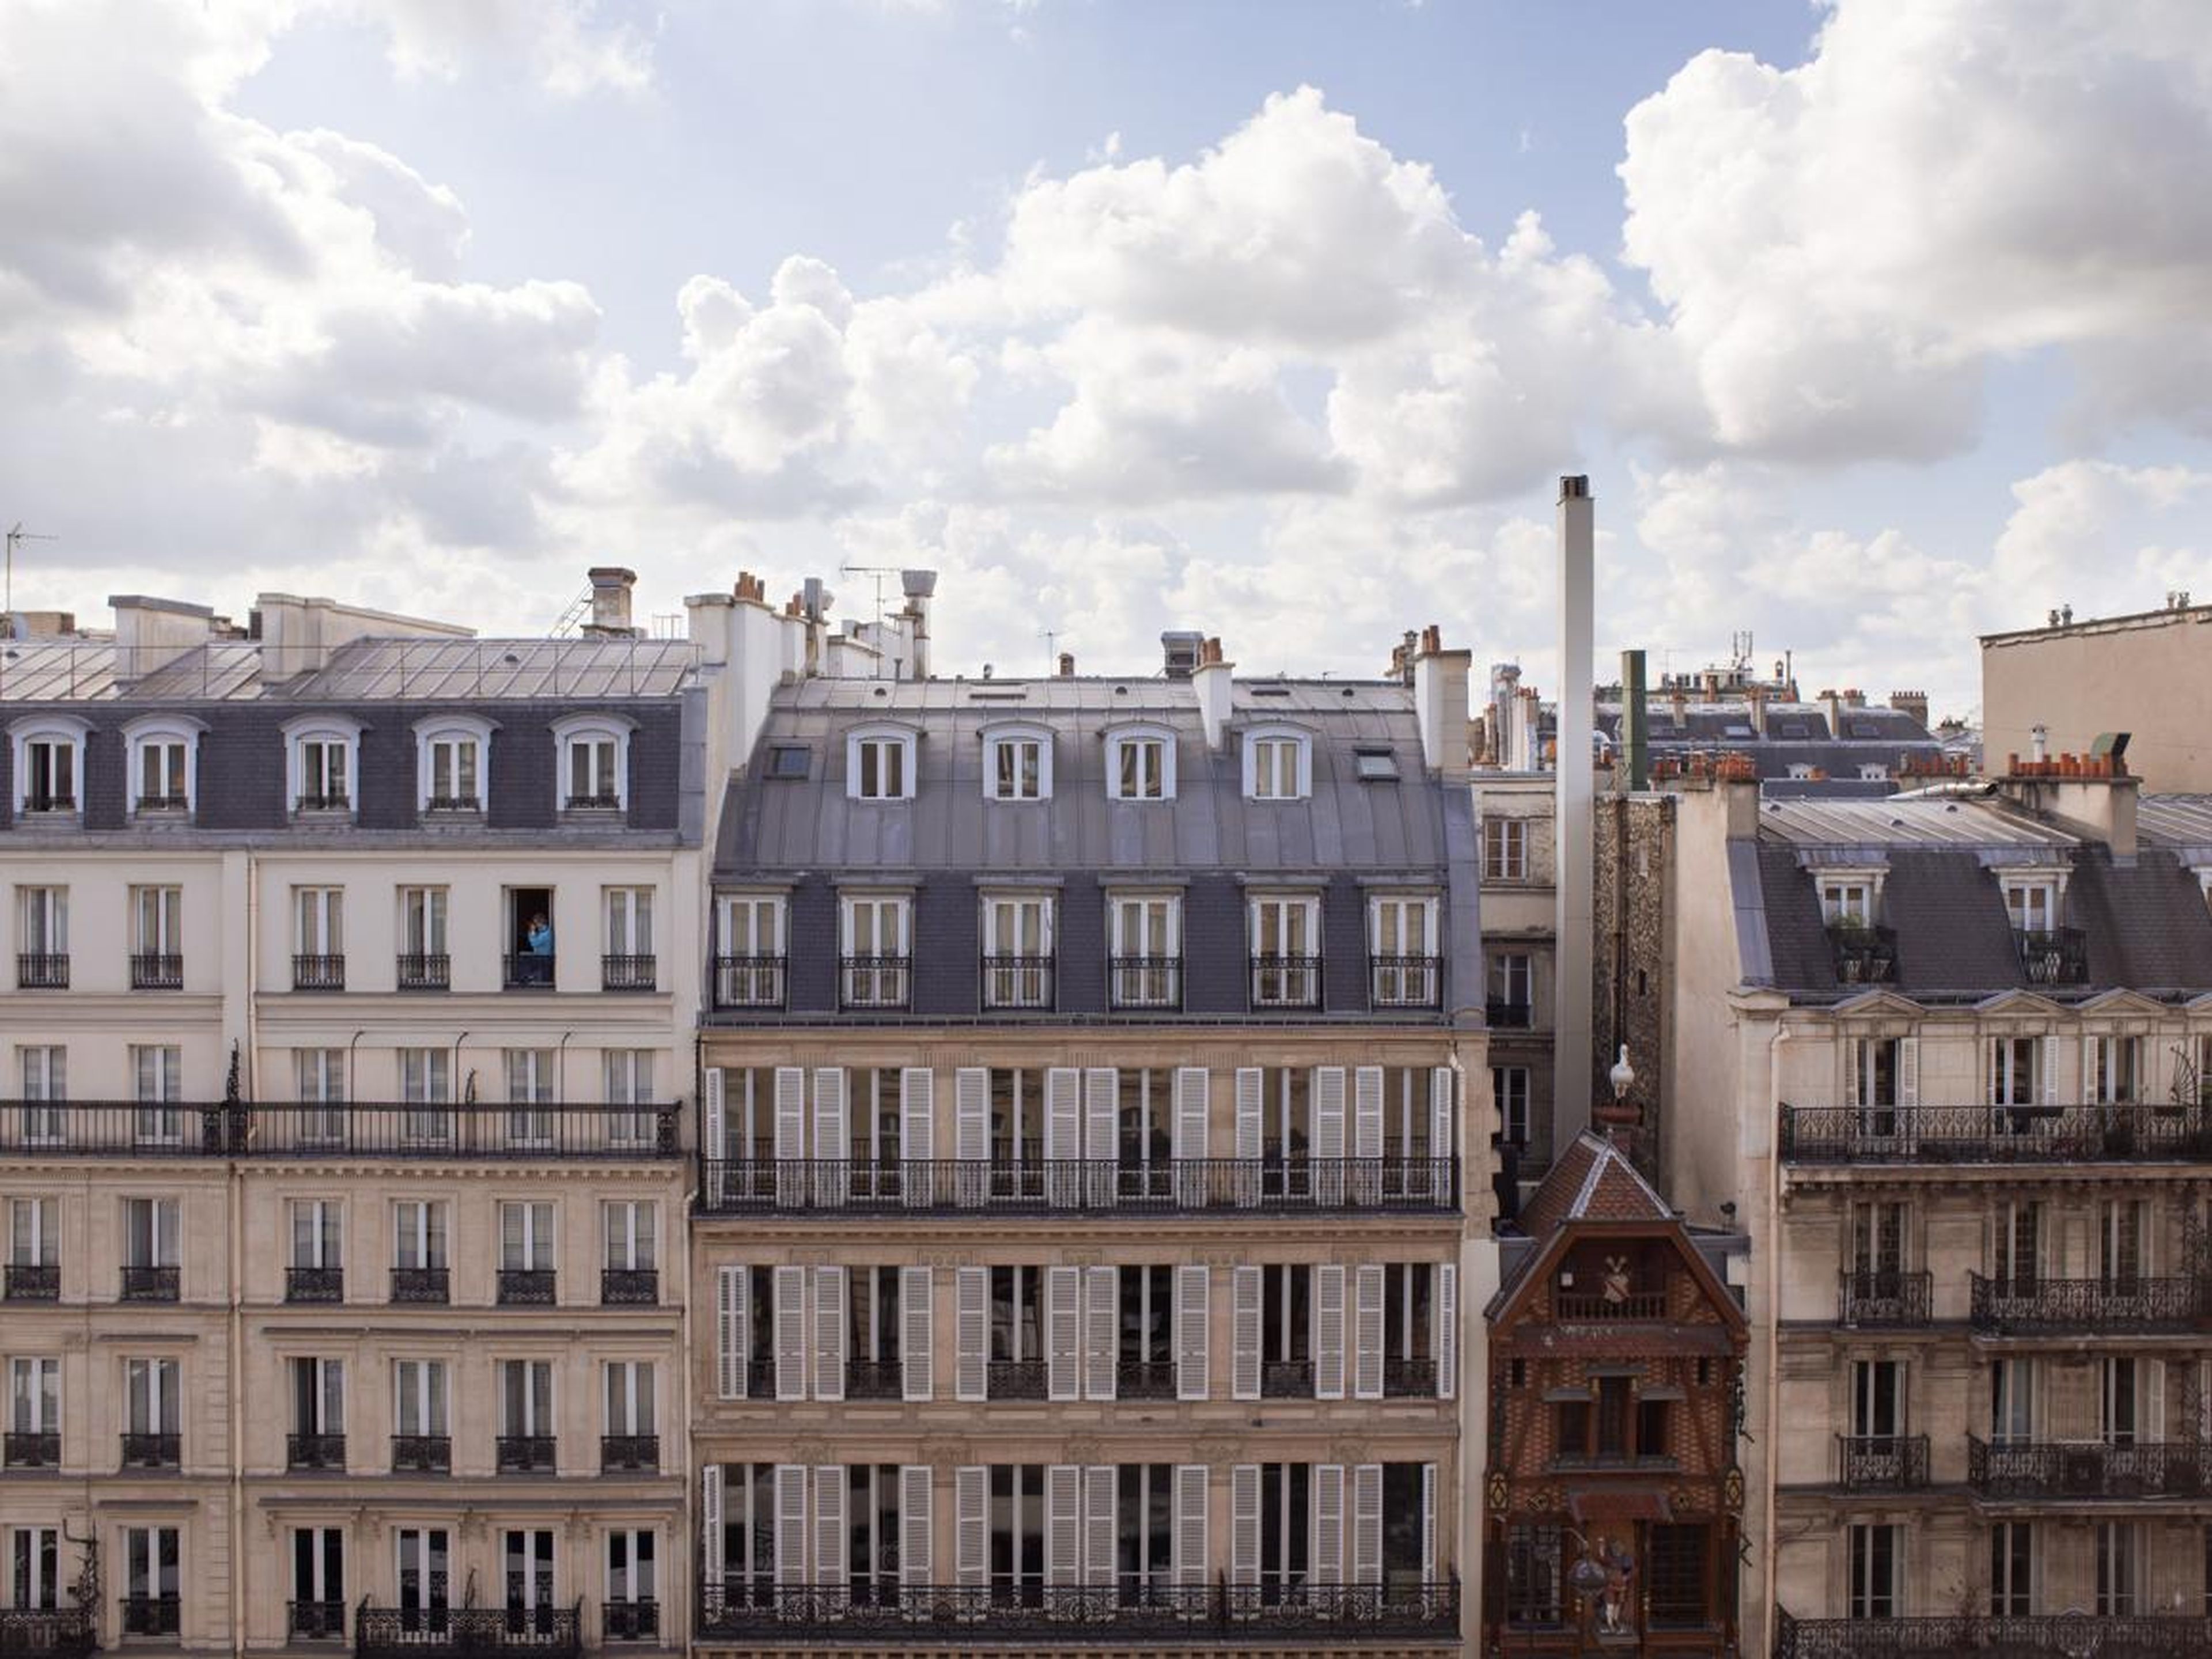 View of Paris, France from the hotel window.